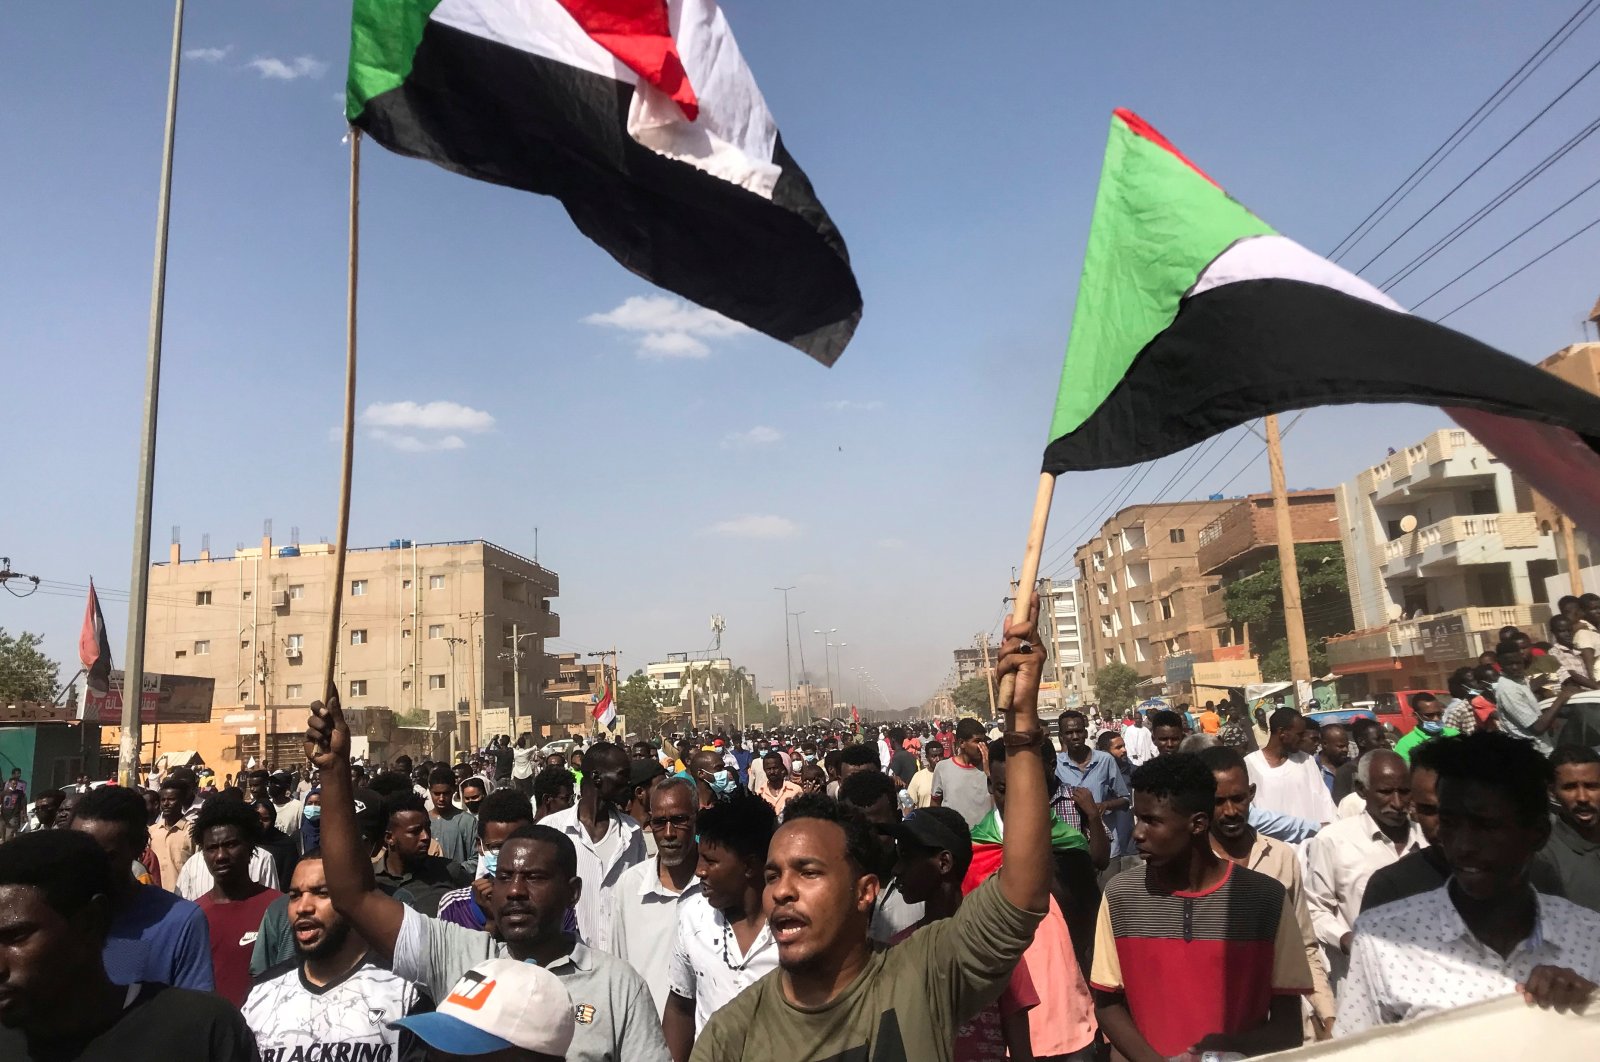 Protesters hold flags and chant slogans as they march against the Sudanese military's recent seizure of power and ousting of the civilian government, in the capital Khartoum, Sudan, Oct. 30, 2021. (Reuters Photo)